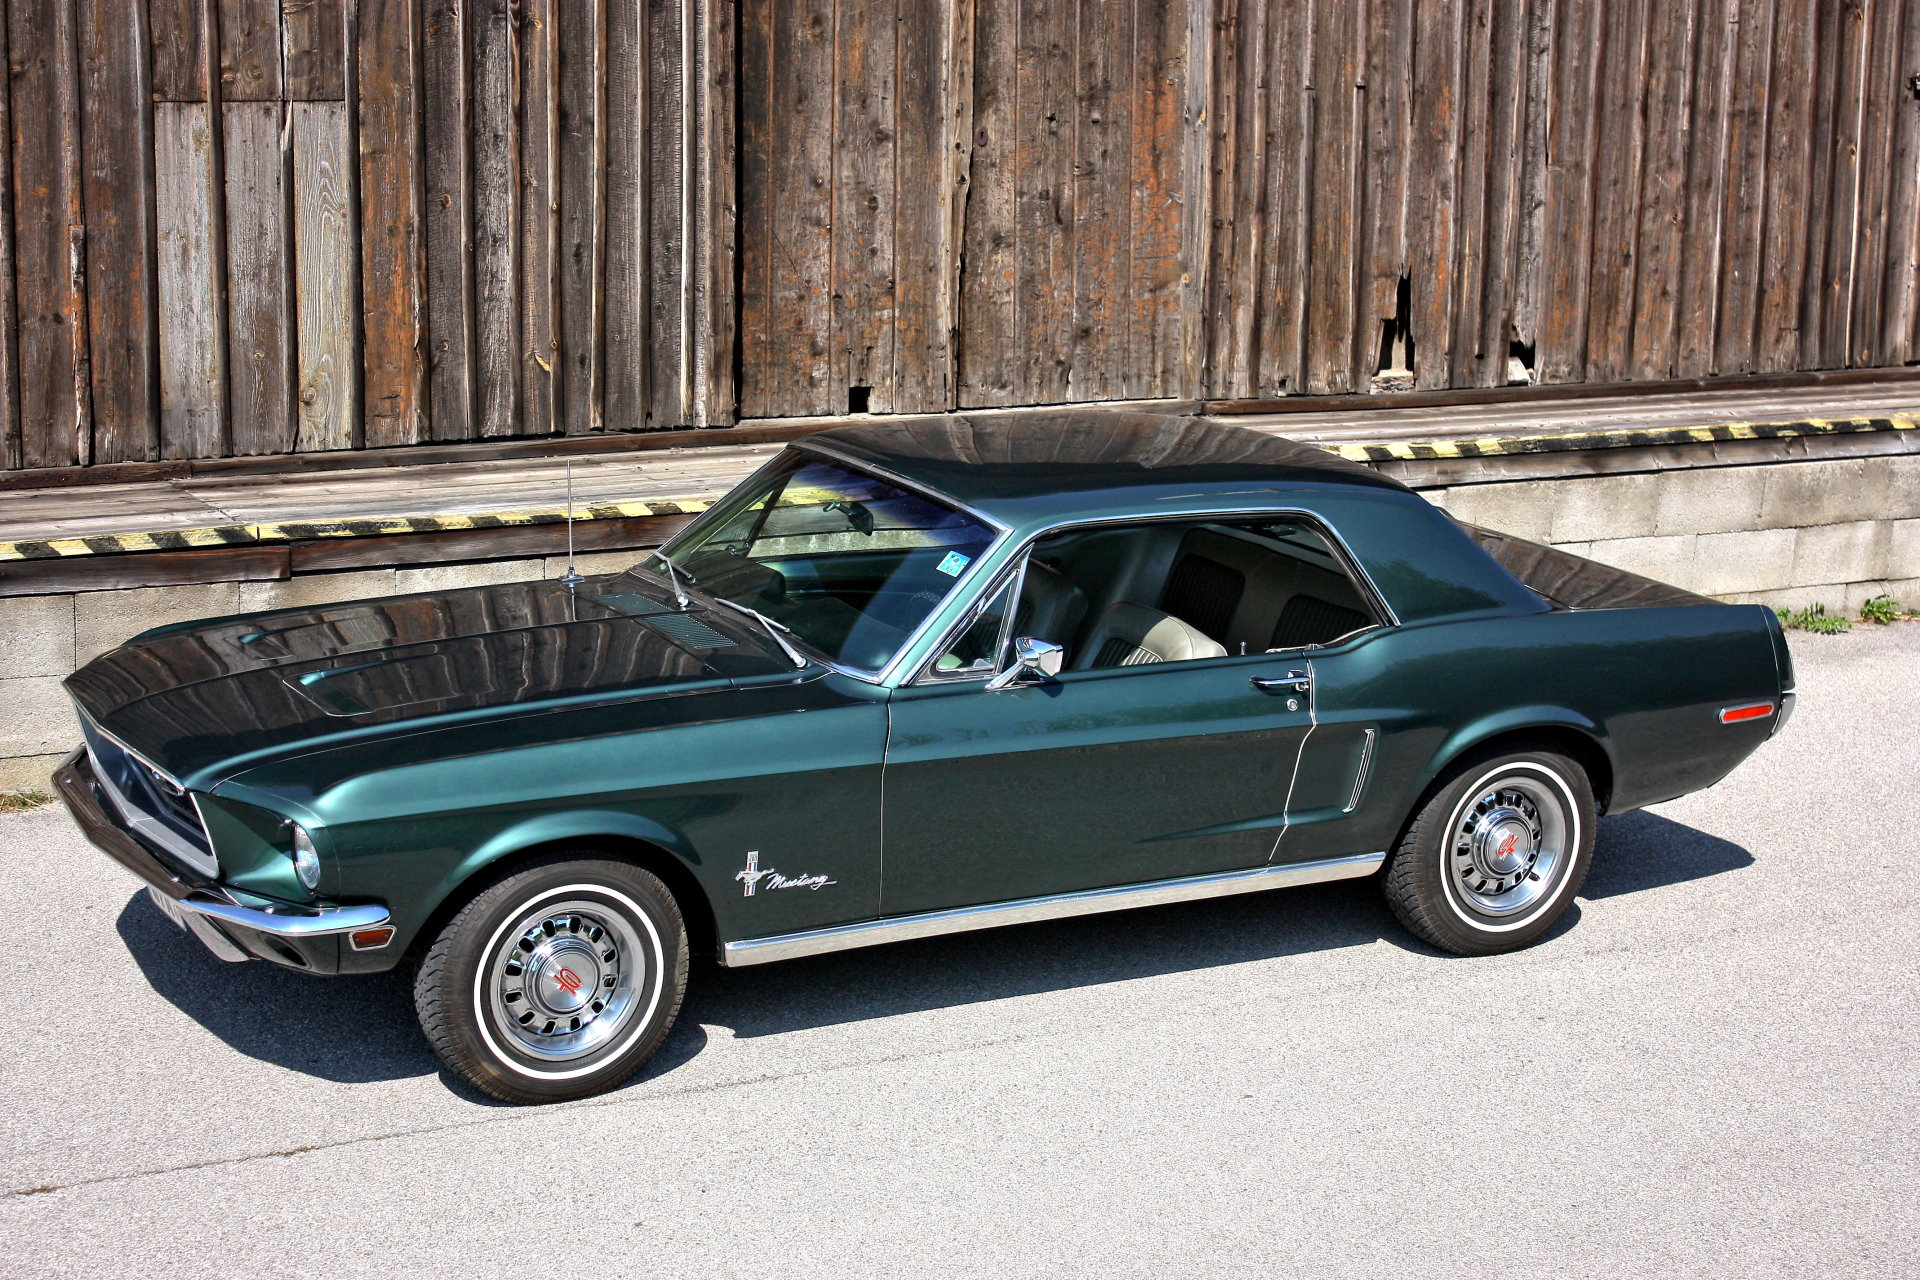 ford mustang bj.68 oldtimer hochzeitsauto